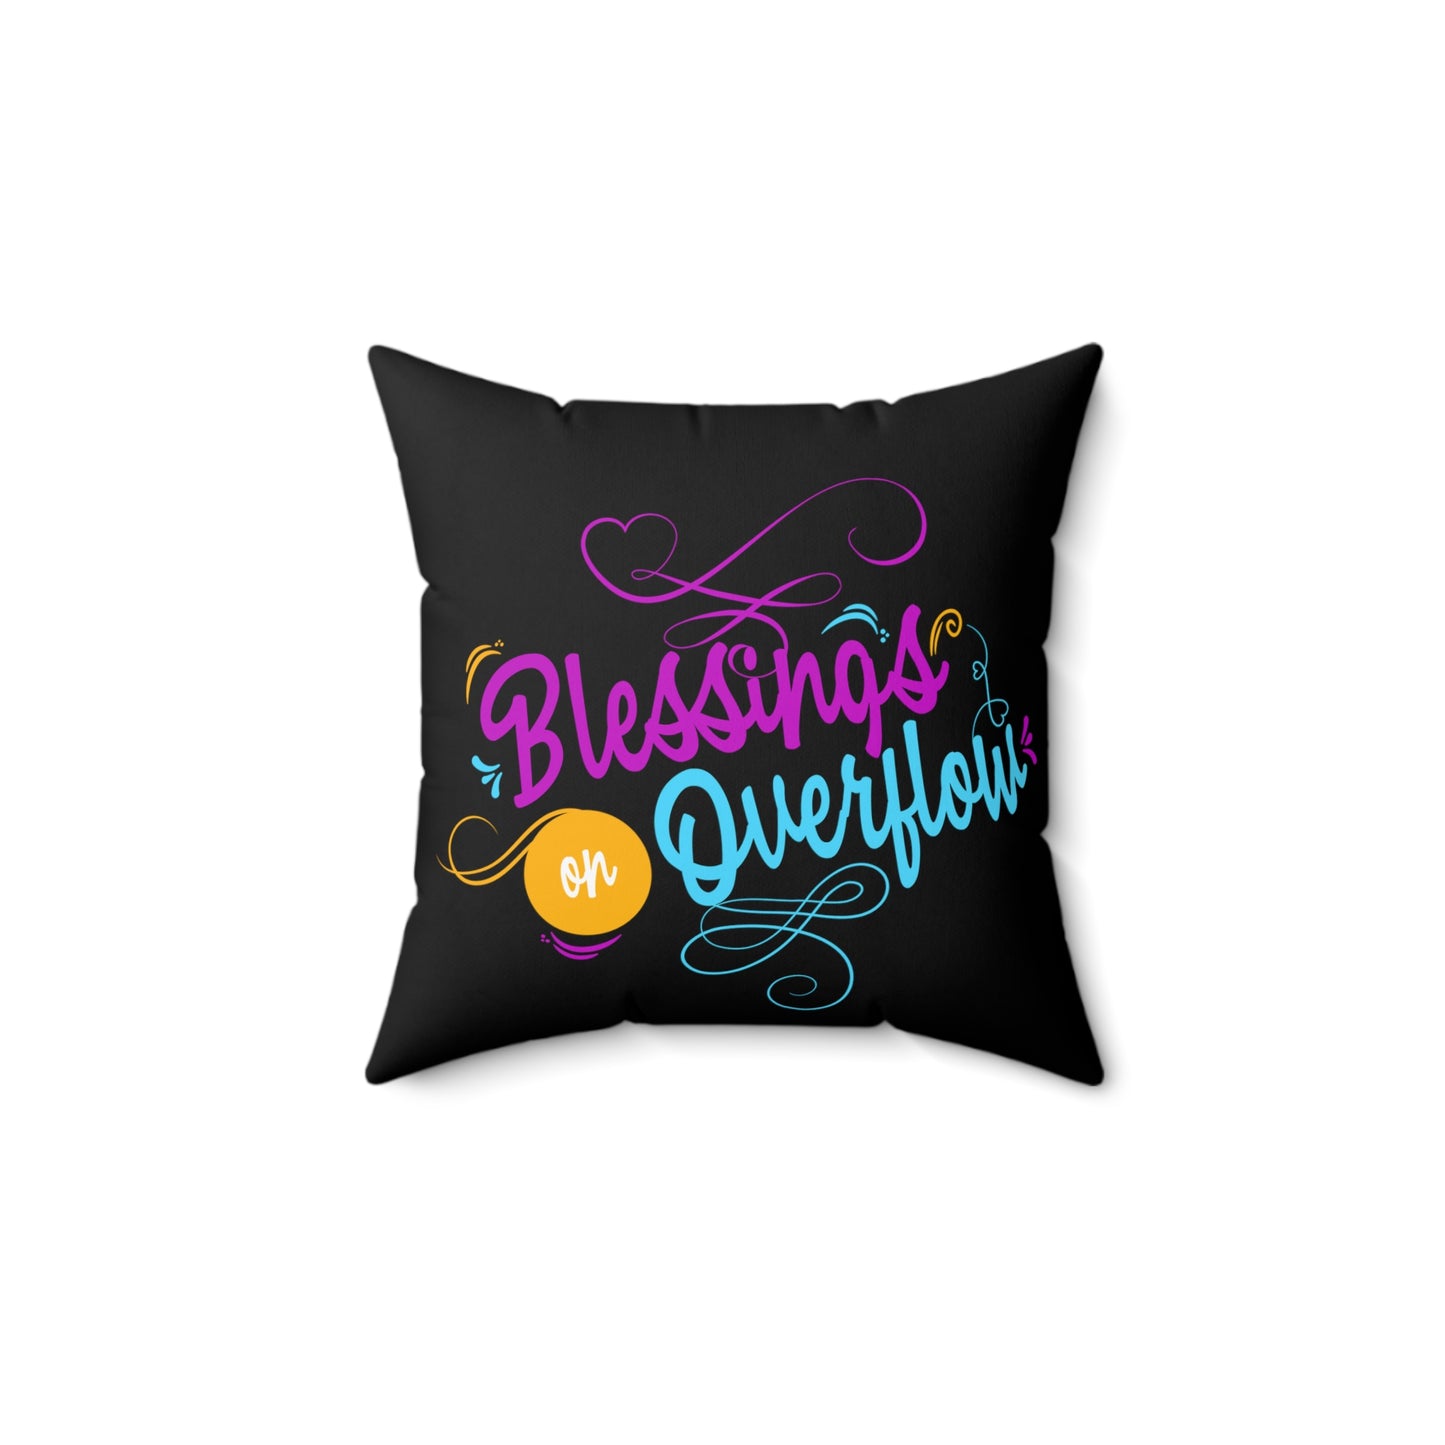 Blessings on Overflow pillow